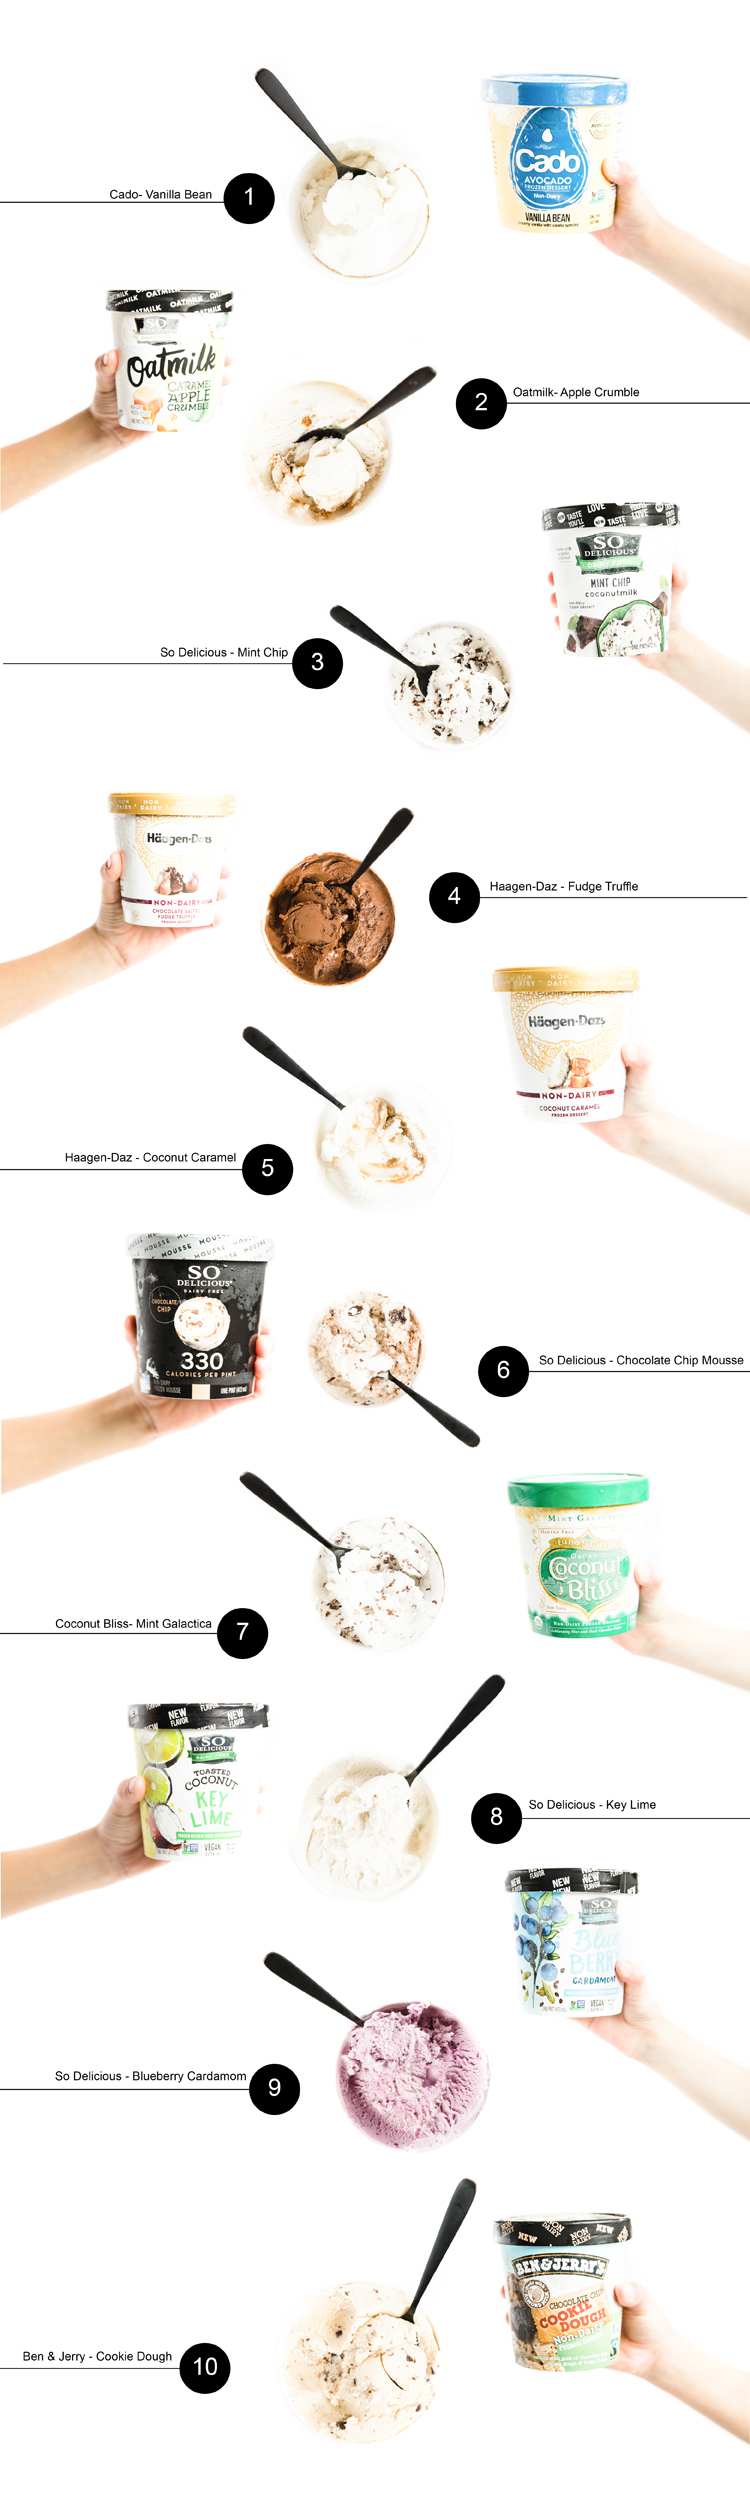 The Best Dairy free and Nut Free Ice Creams // www.deliacreates.com // we tested 10 different ones and found a favorite!